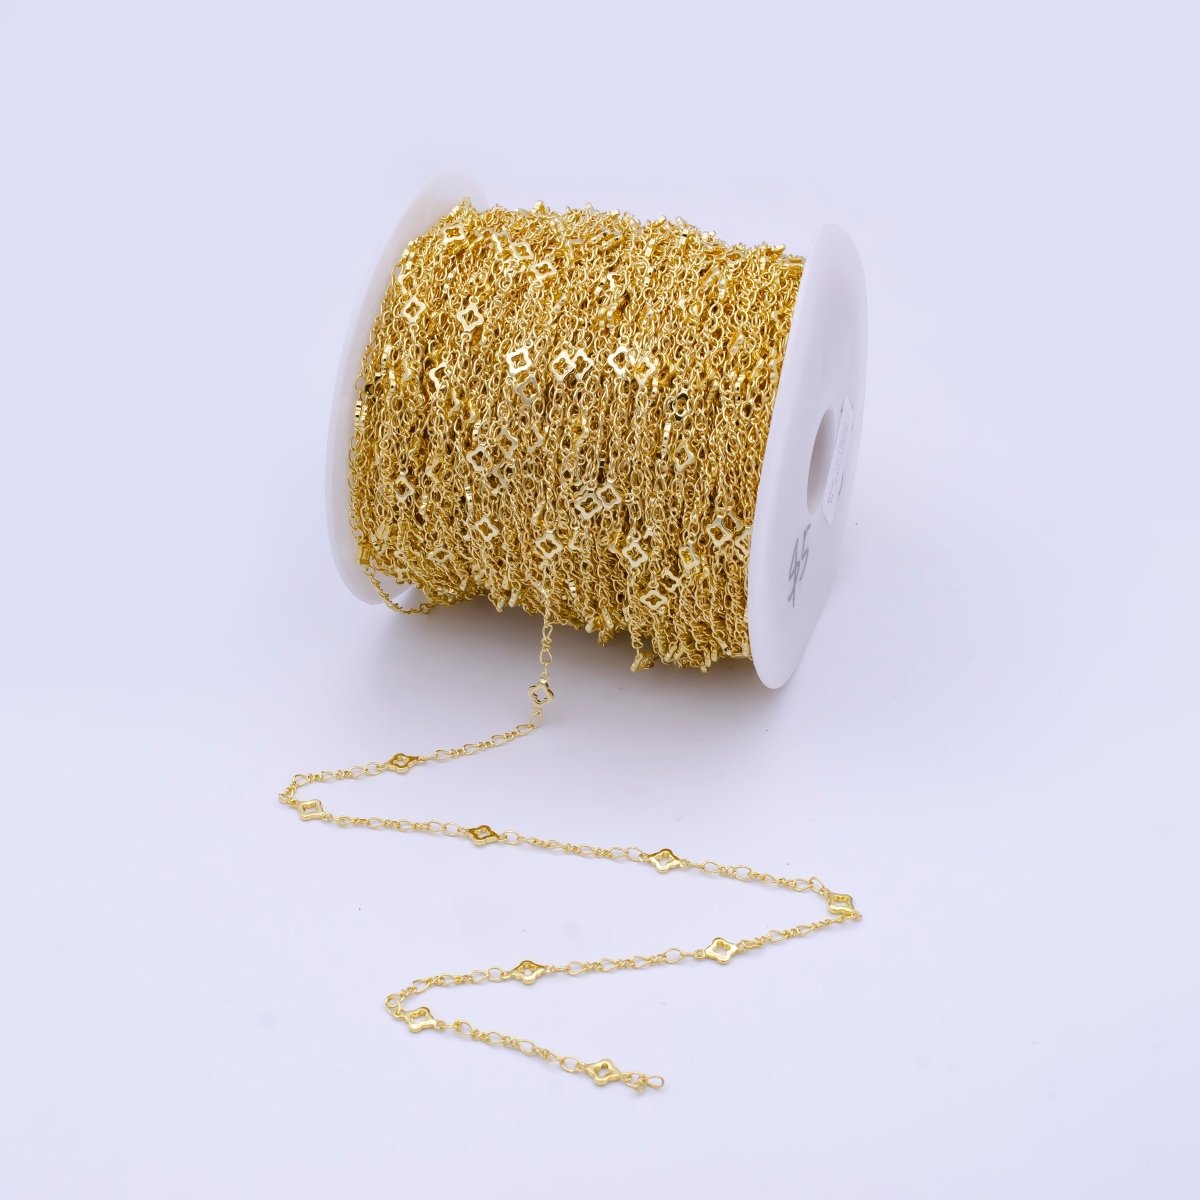 Dainty 24k Gold Filled Clover Chain by Yard Wholesale Gold Station Chain 5mm Clover Cable Chain for Jewelry Making | ROLL-791 - DLUXCA